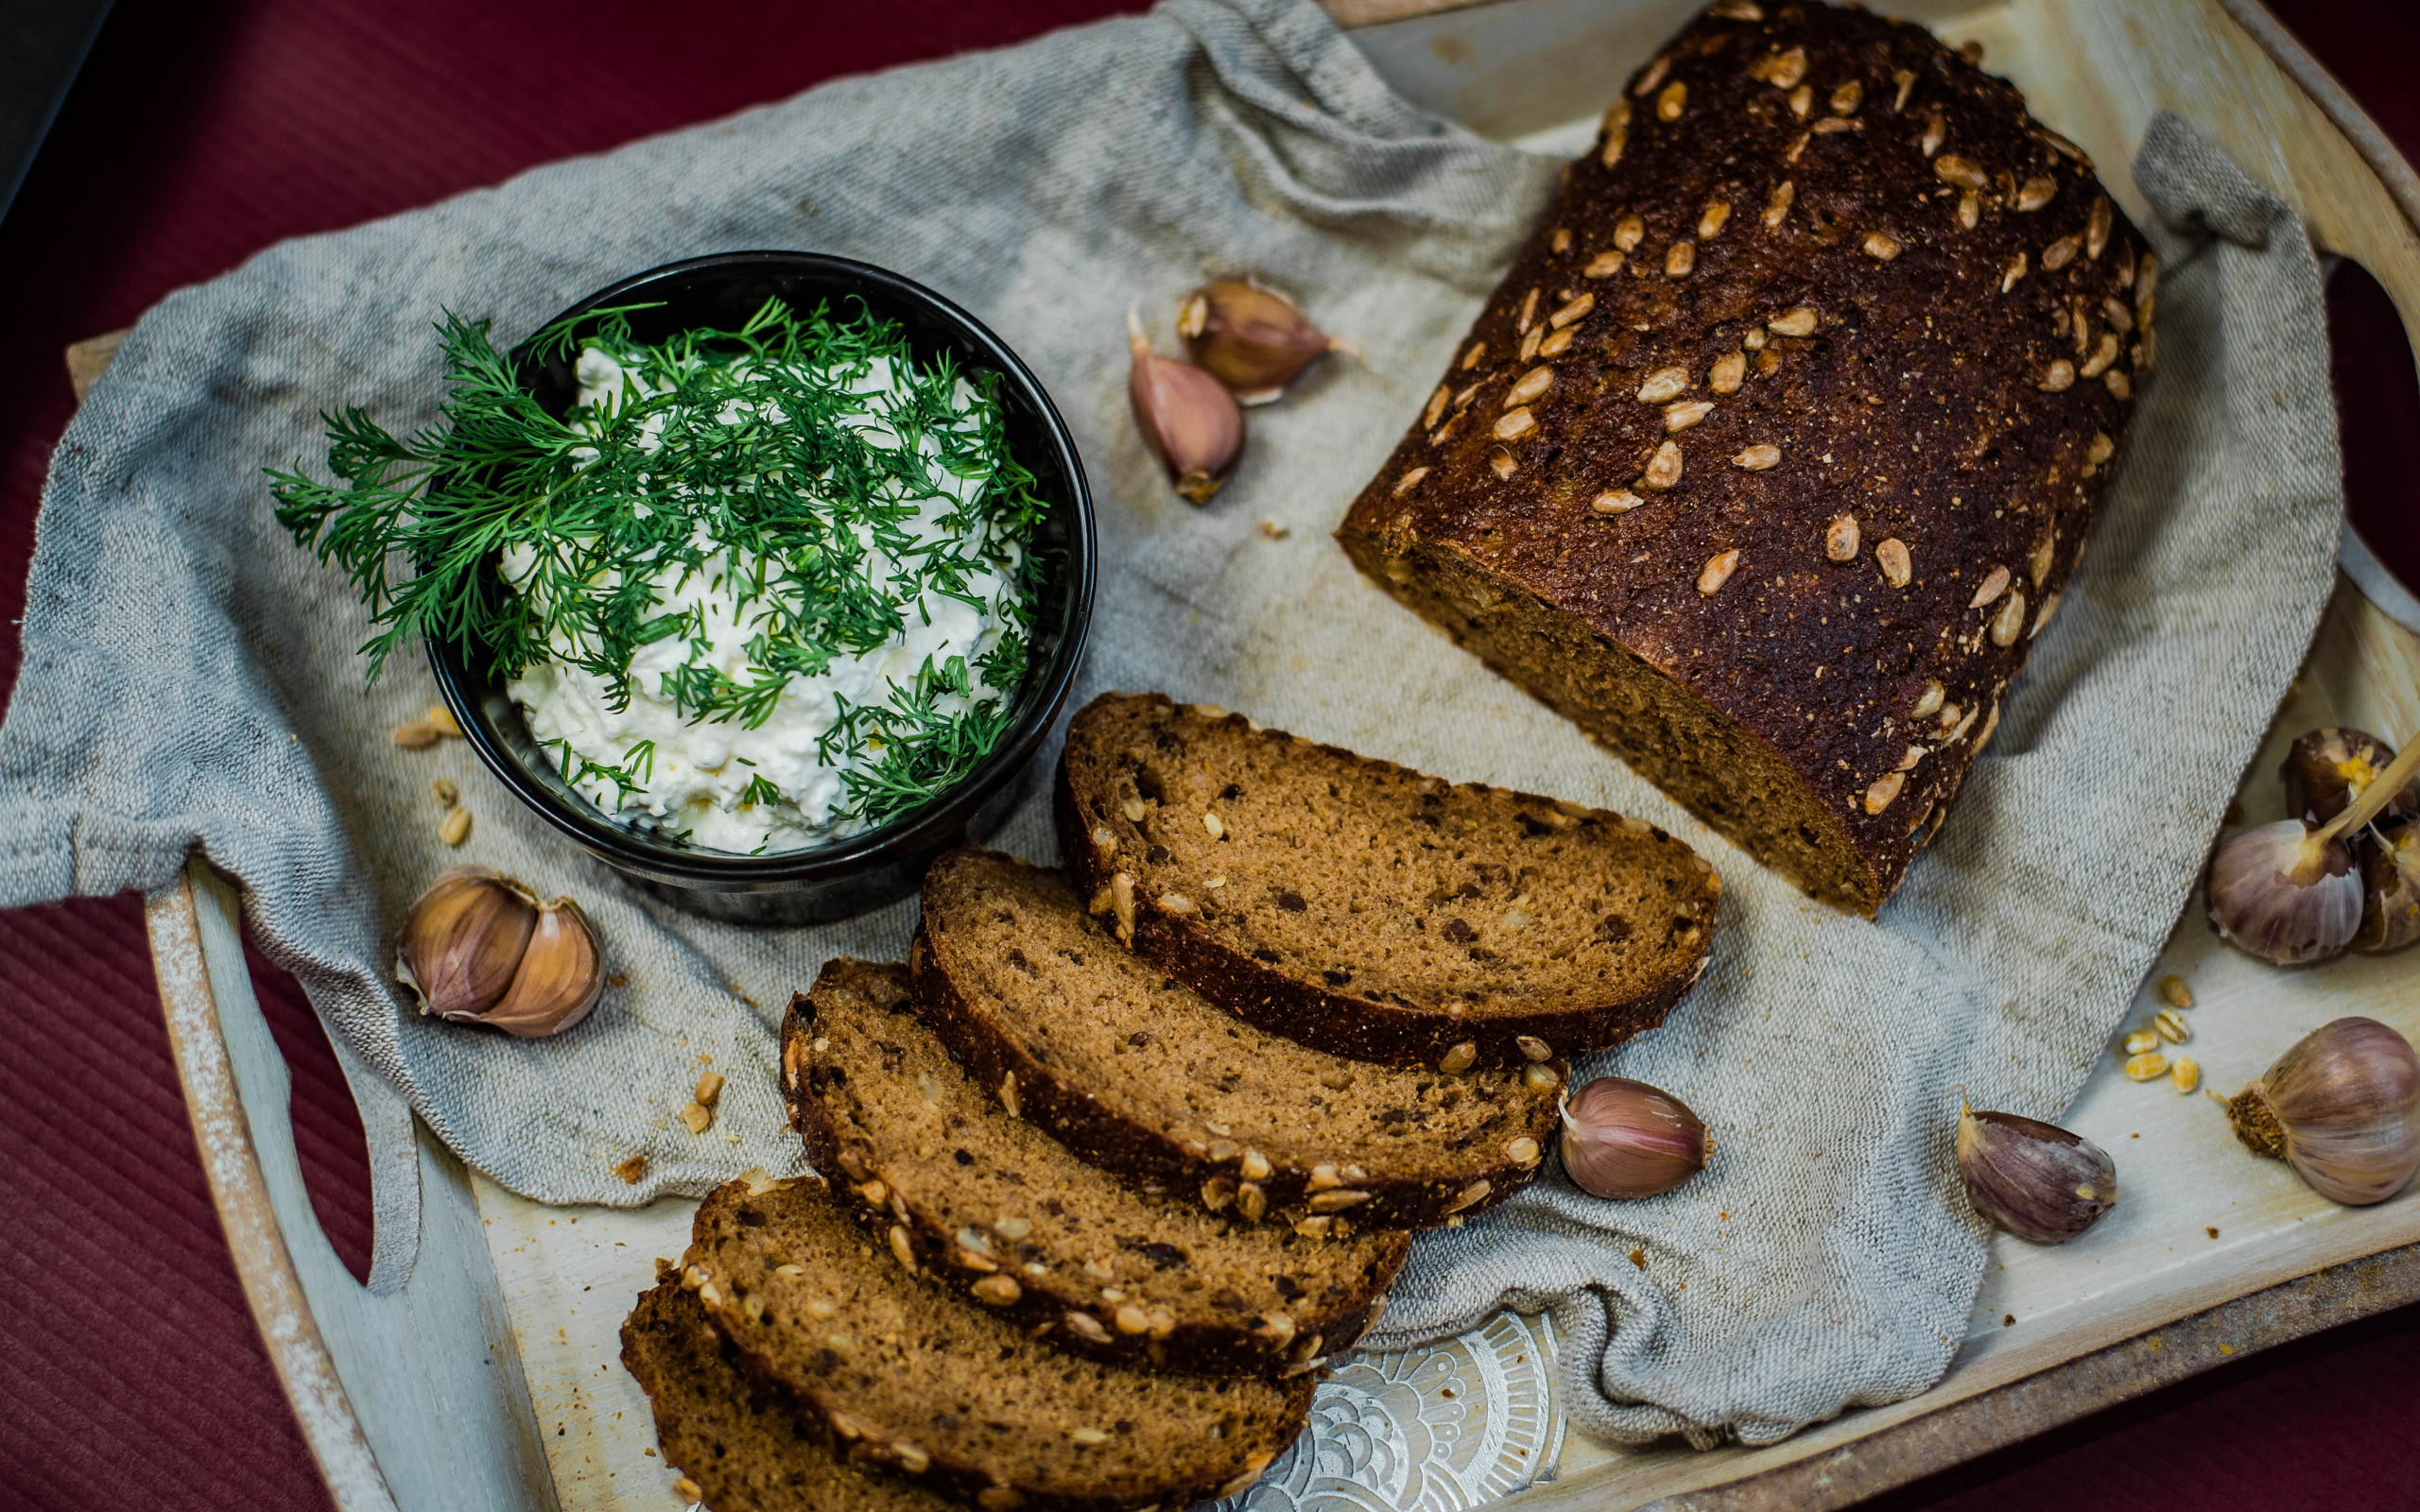 Fresh bread with grains on the table with sauce and garlic